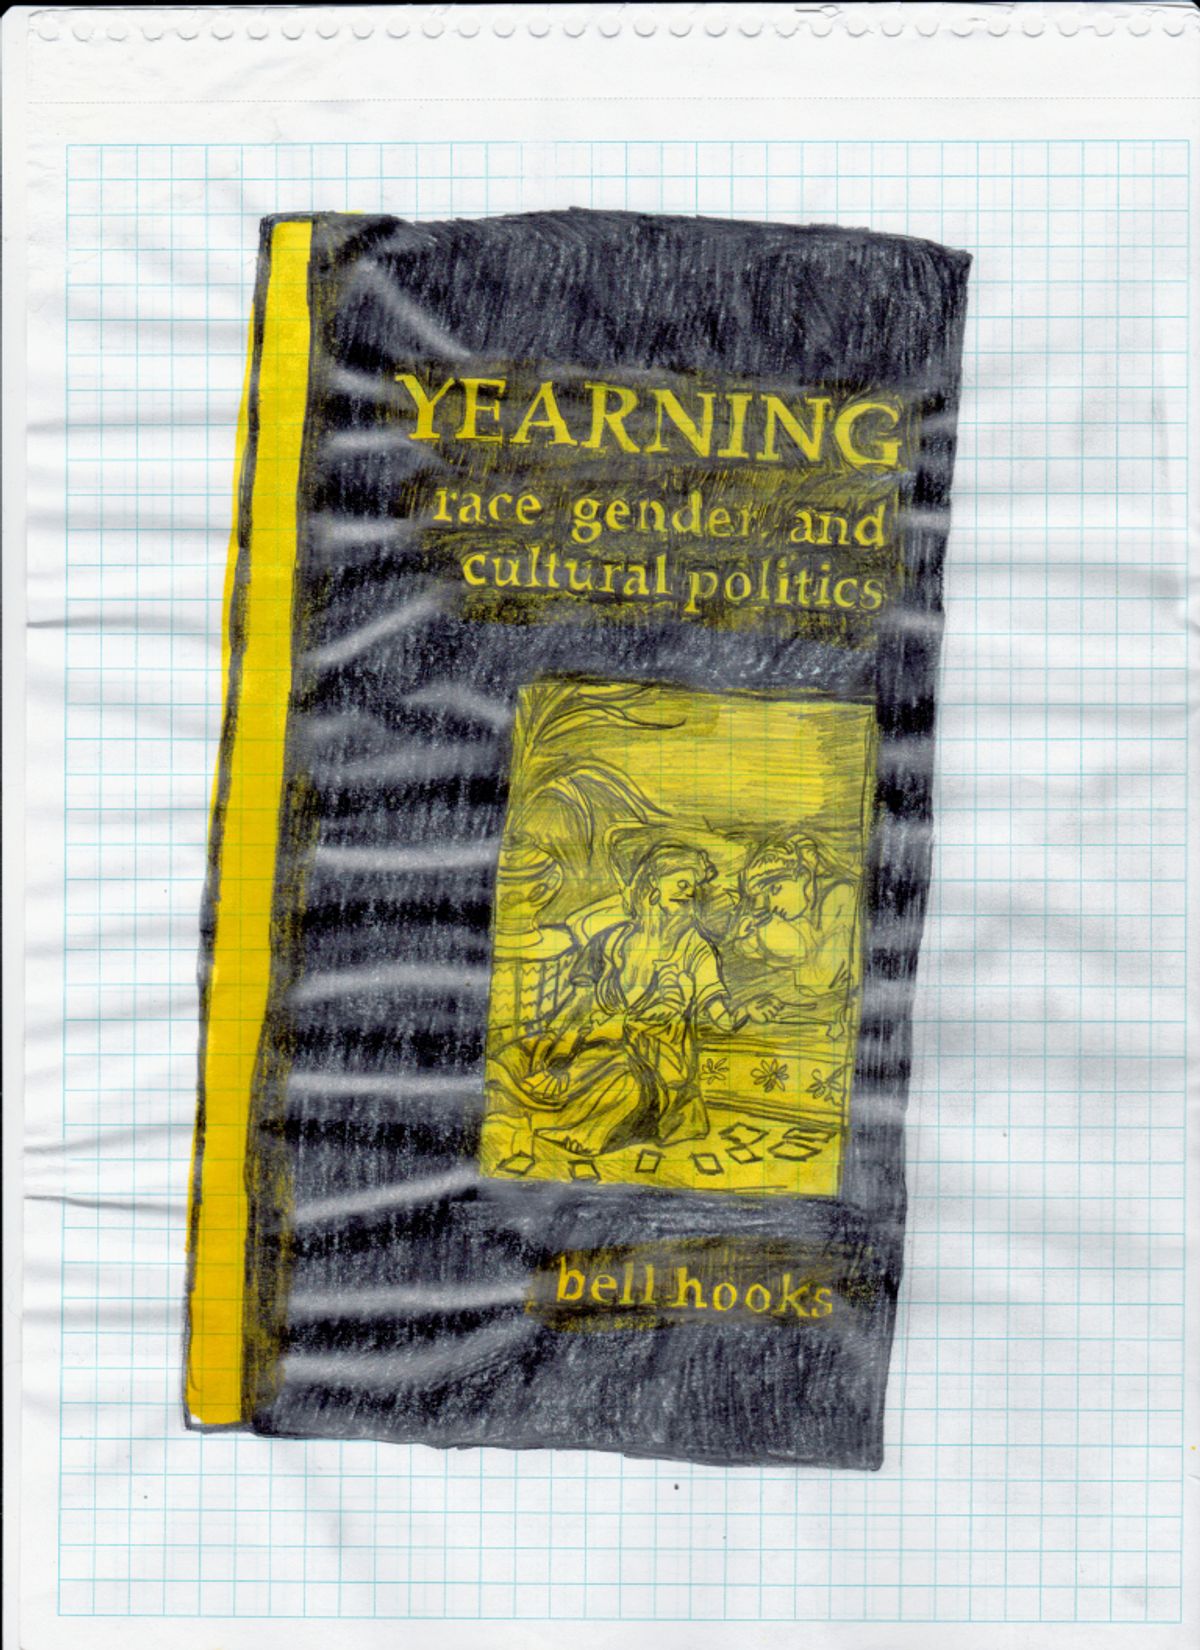 Cauleen Smith, Bell Hooks. Yearning (2015). Graphite and acrylic on graph paper Courtesy of the artist